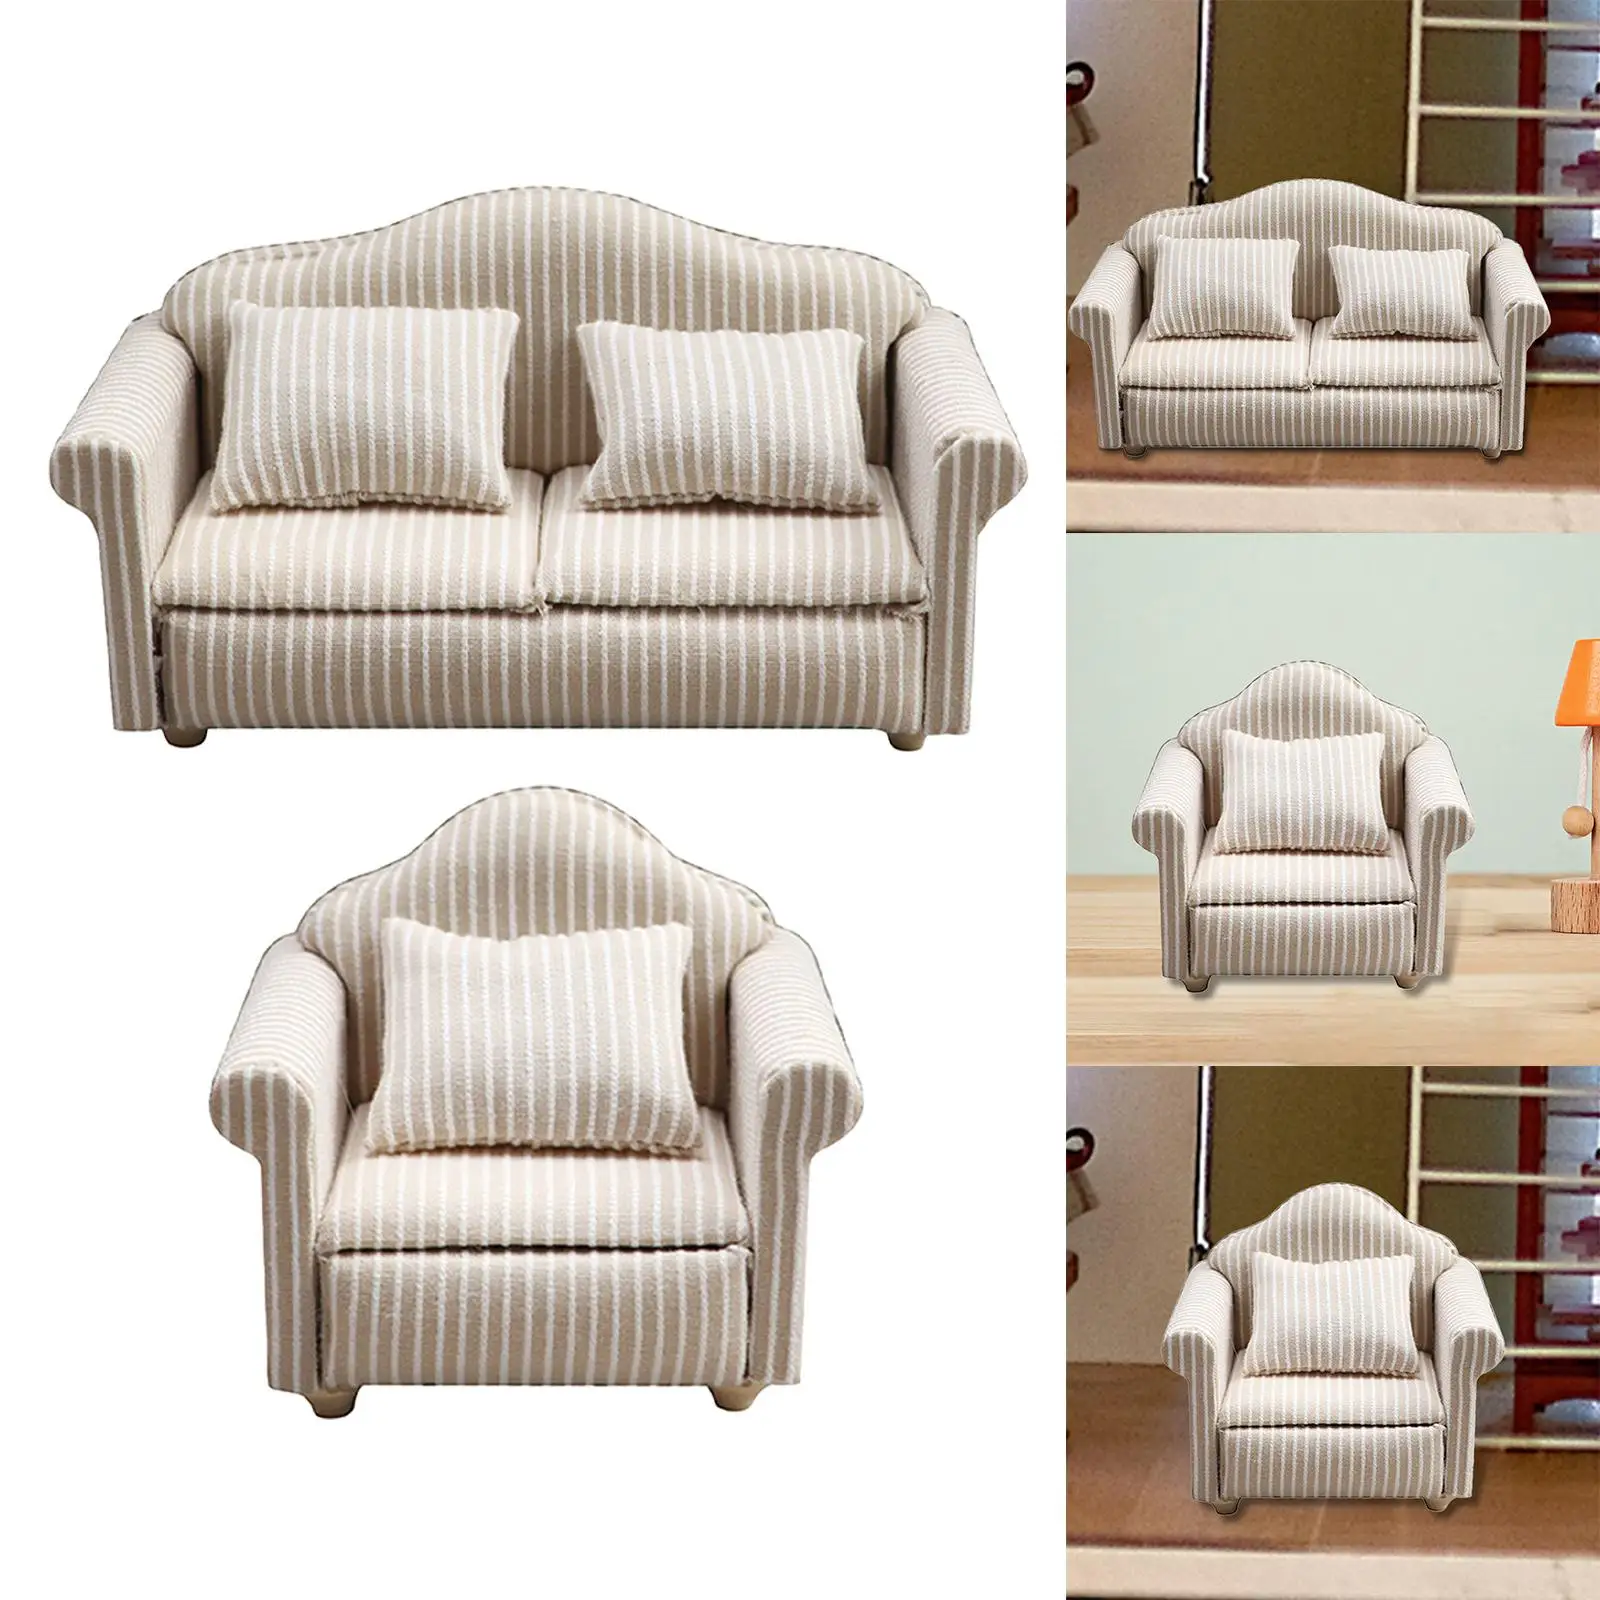 1/12 Scale Dollhouse Sofa Armchair Simulation Accessories for Kids Pretend Play Children